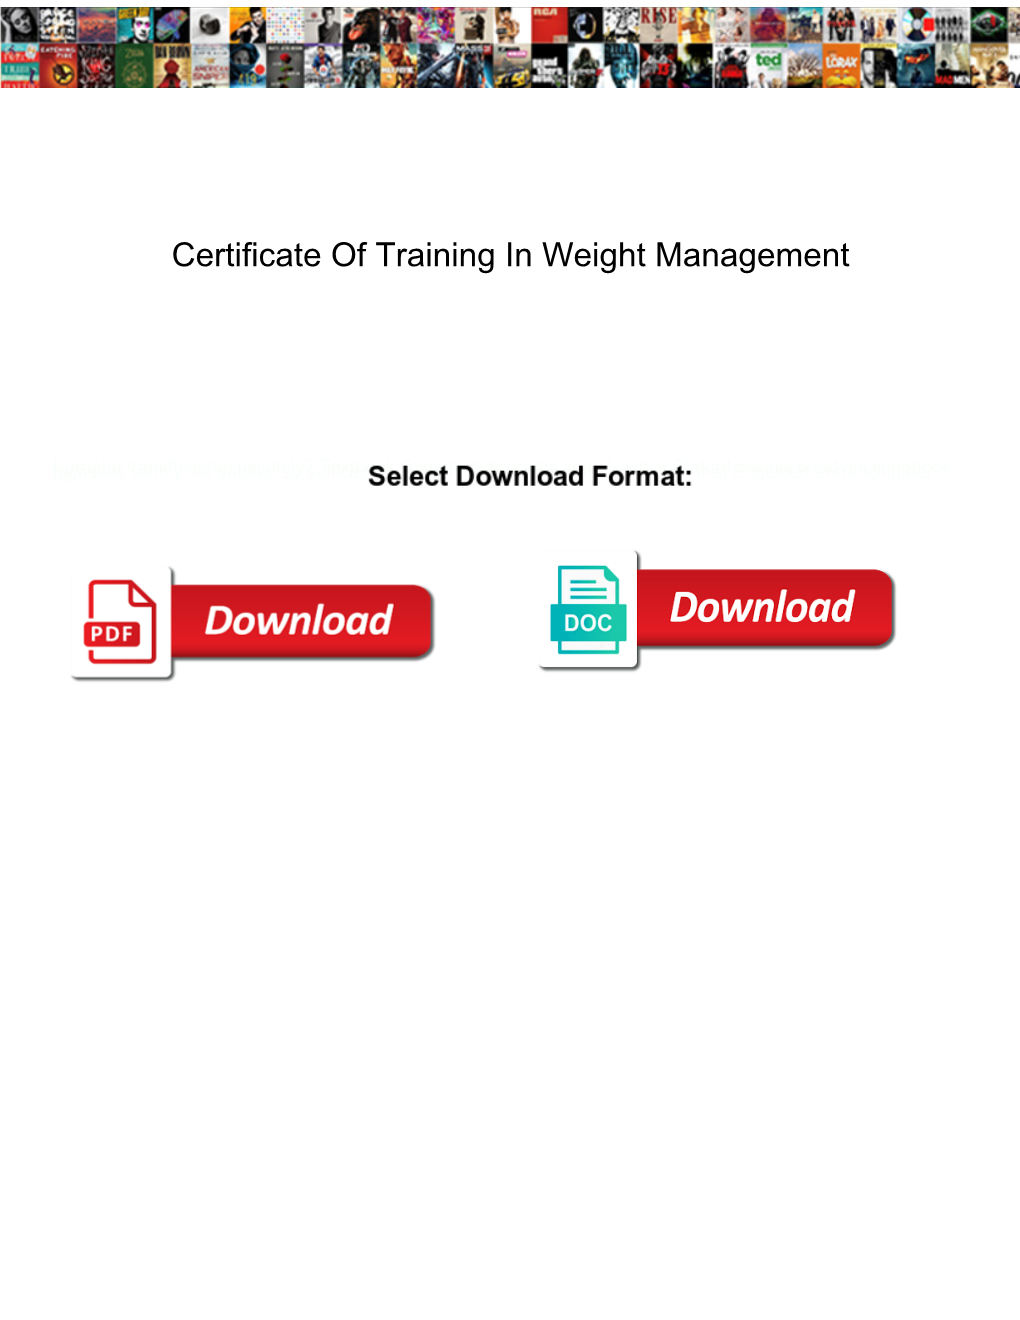 Certificate of Training in Weight Management